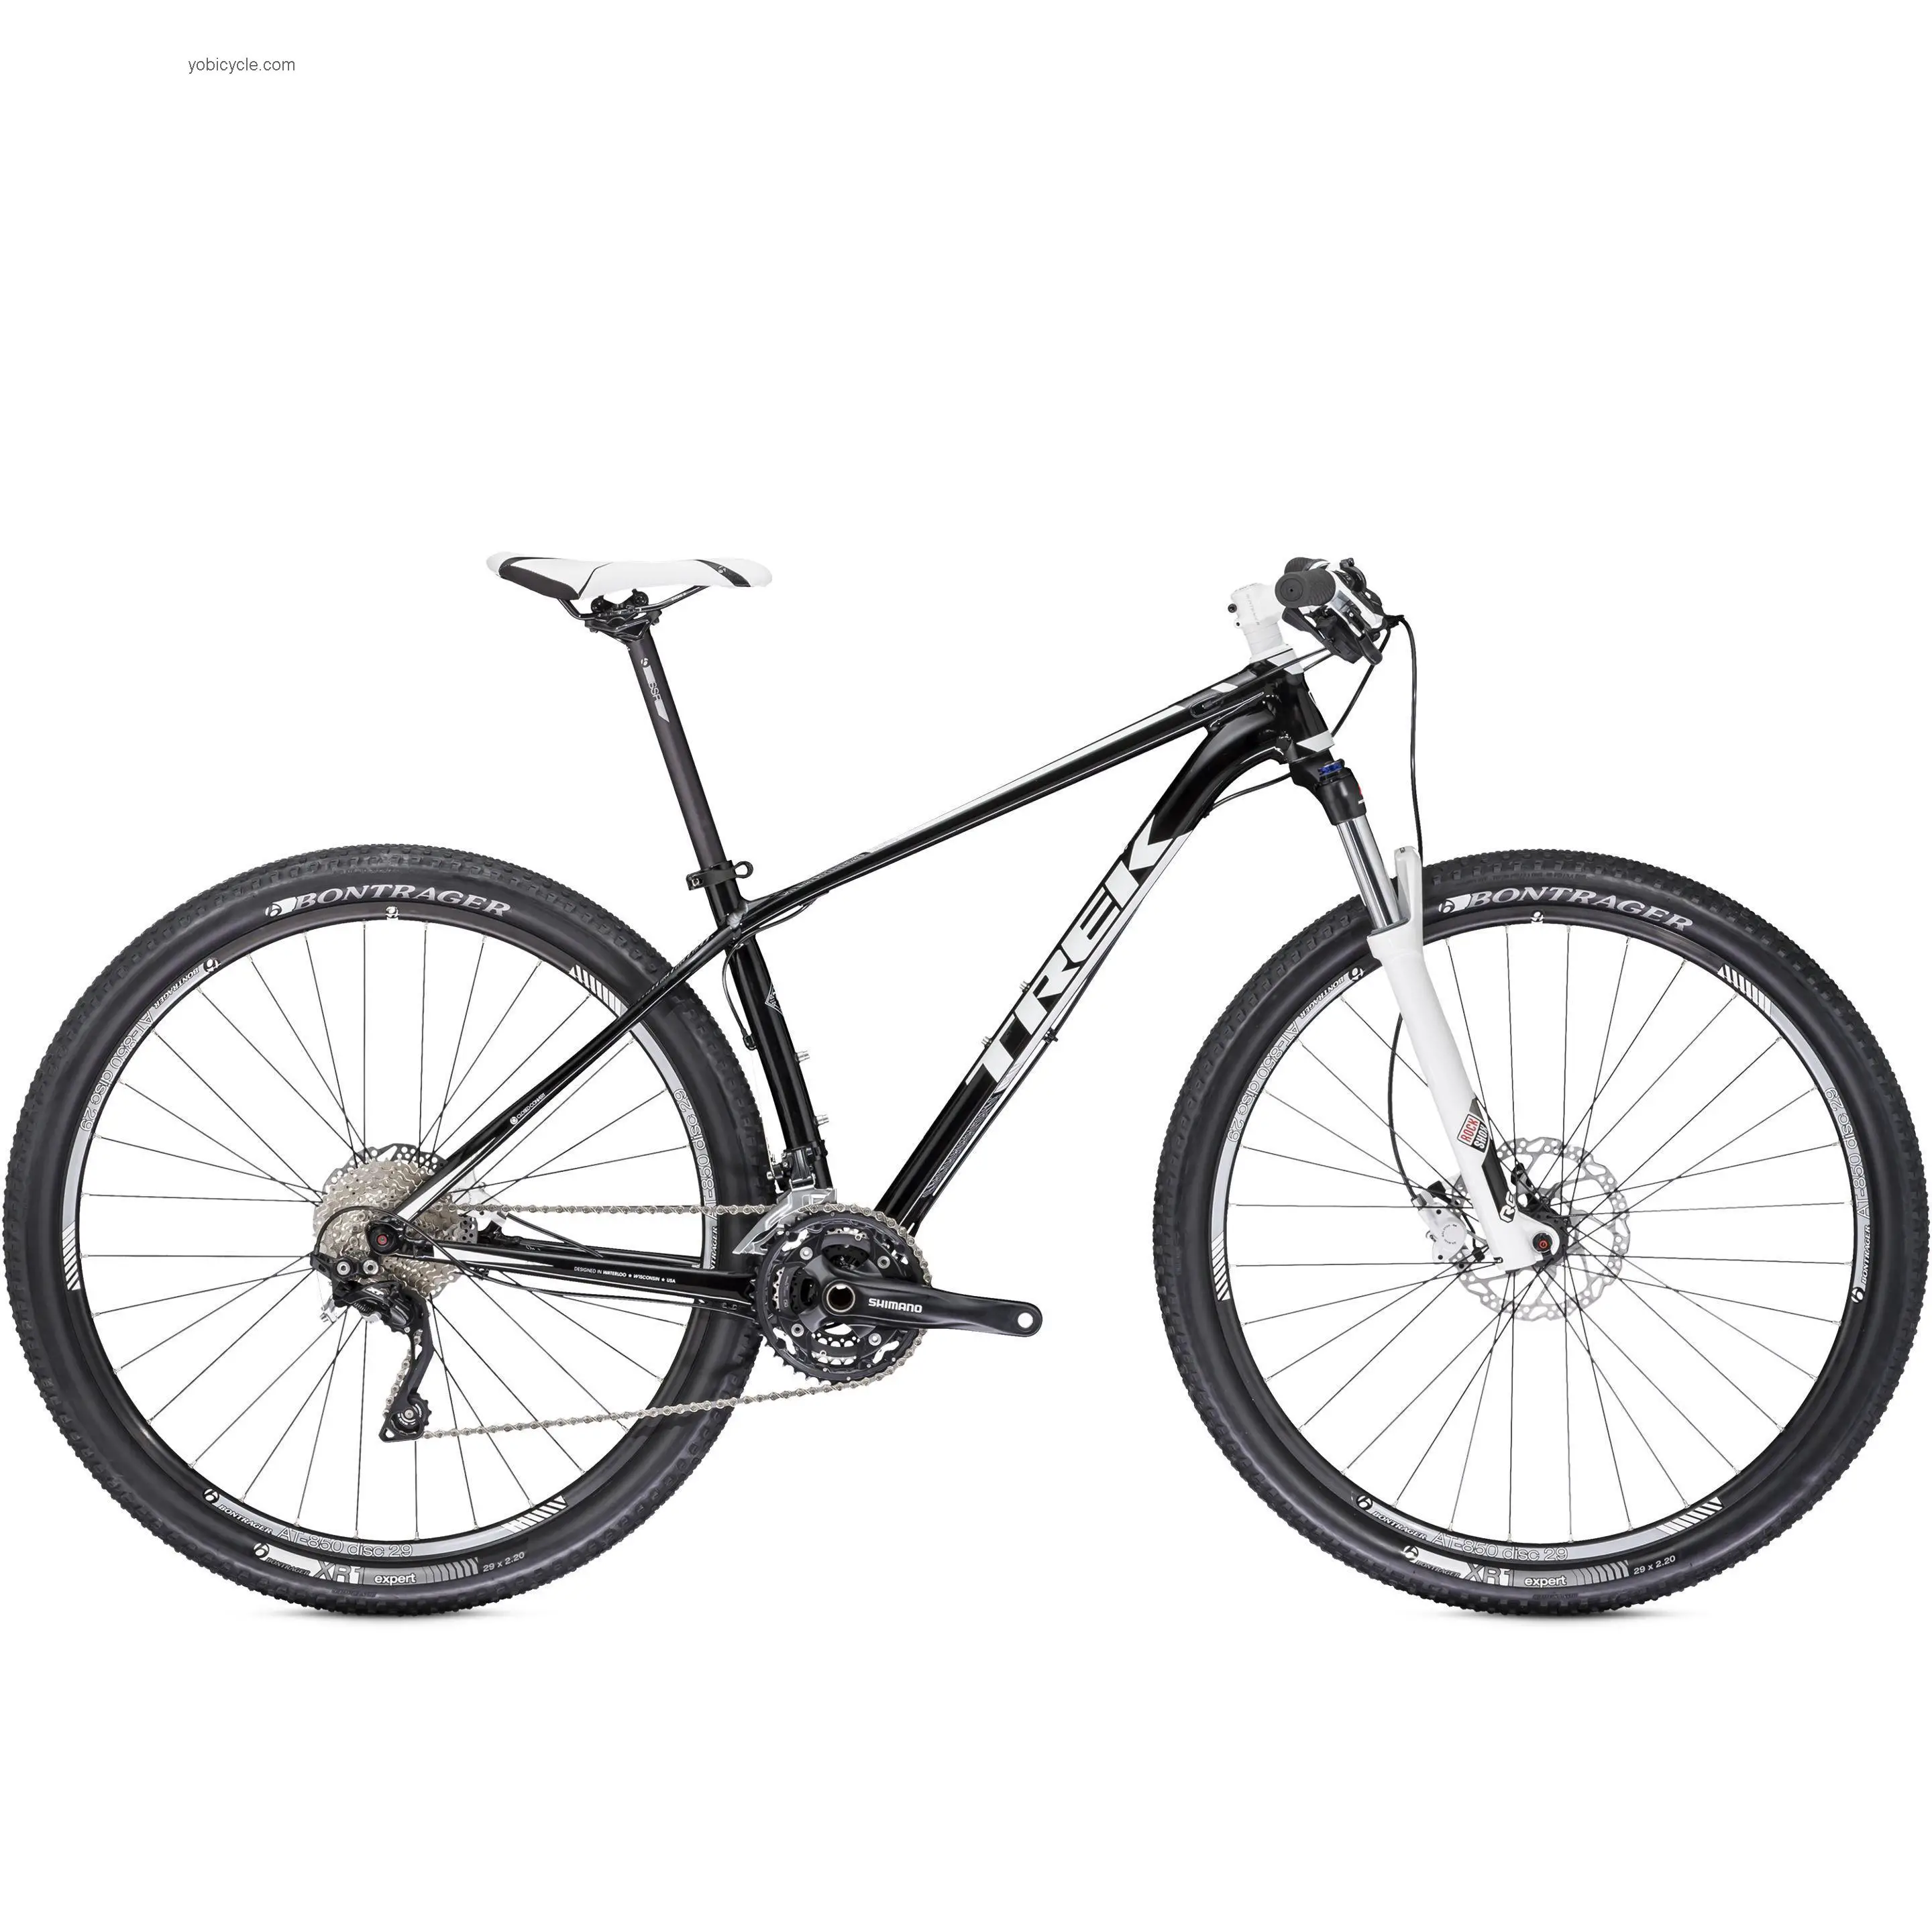 Trek Superfly 5 2014 comparison online with competitors